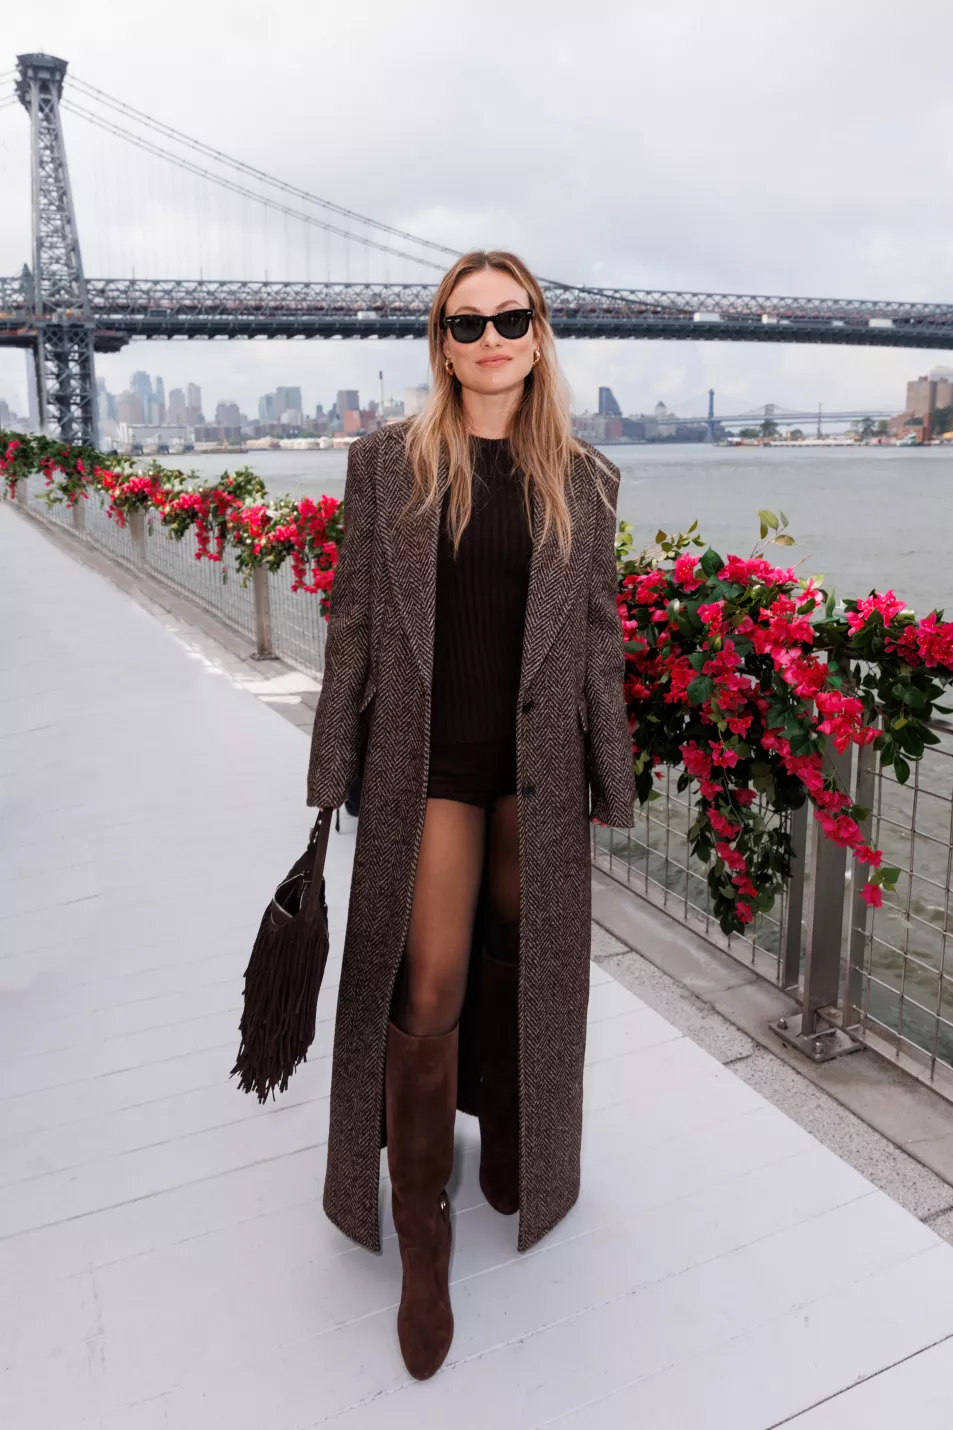 Blake Lively Attended The Michael Kors Show In A Skin-Baring Outfit